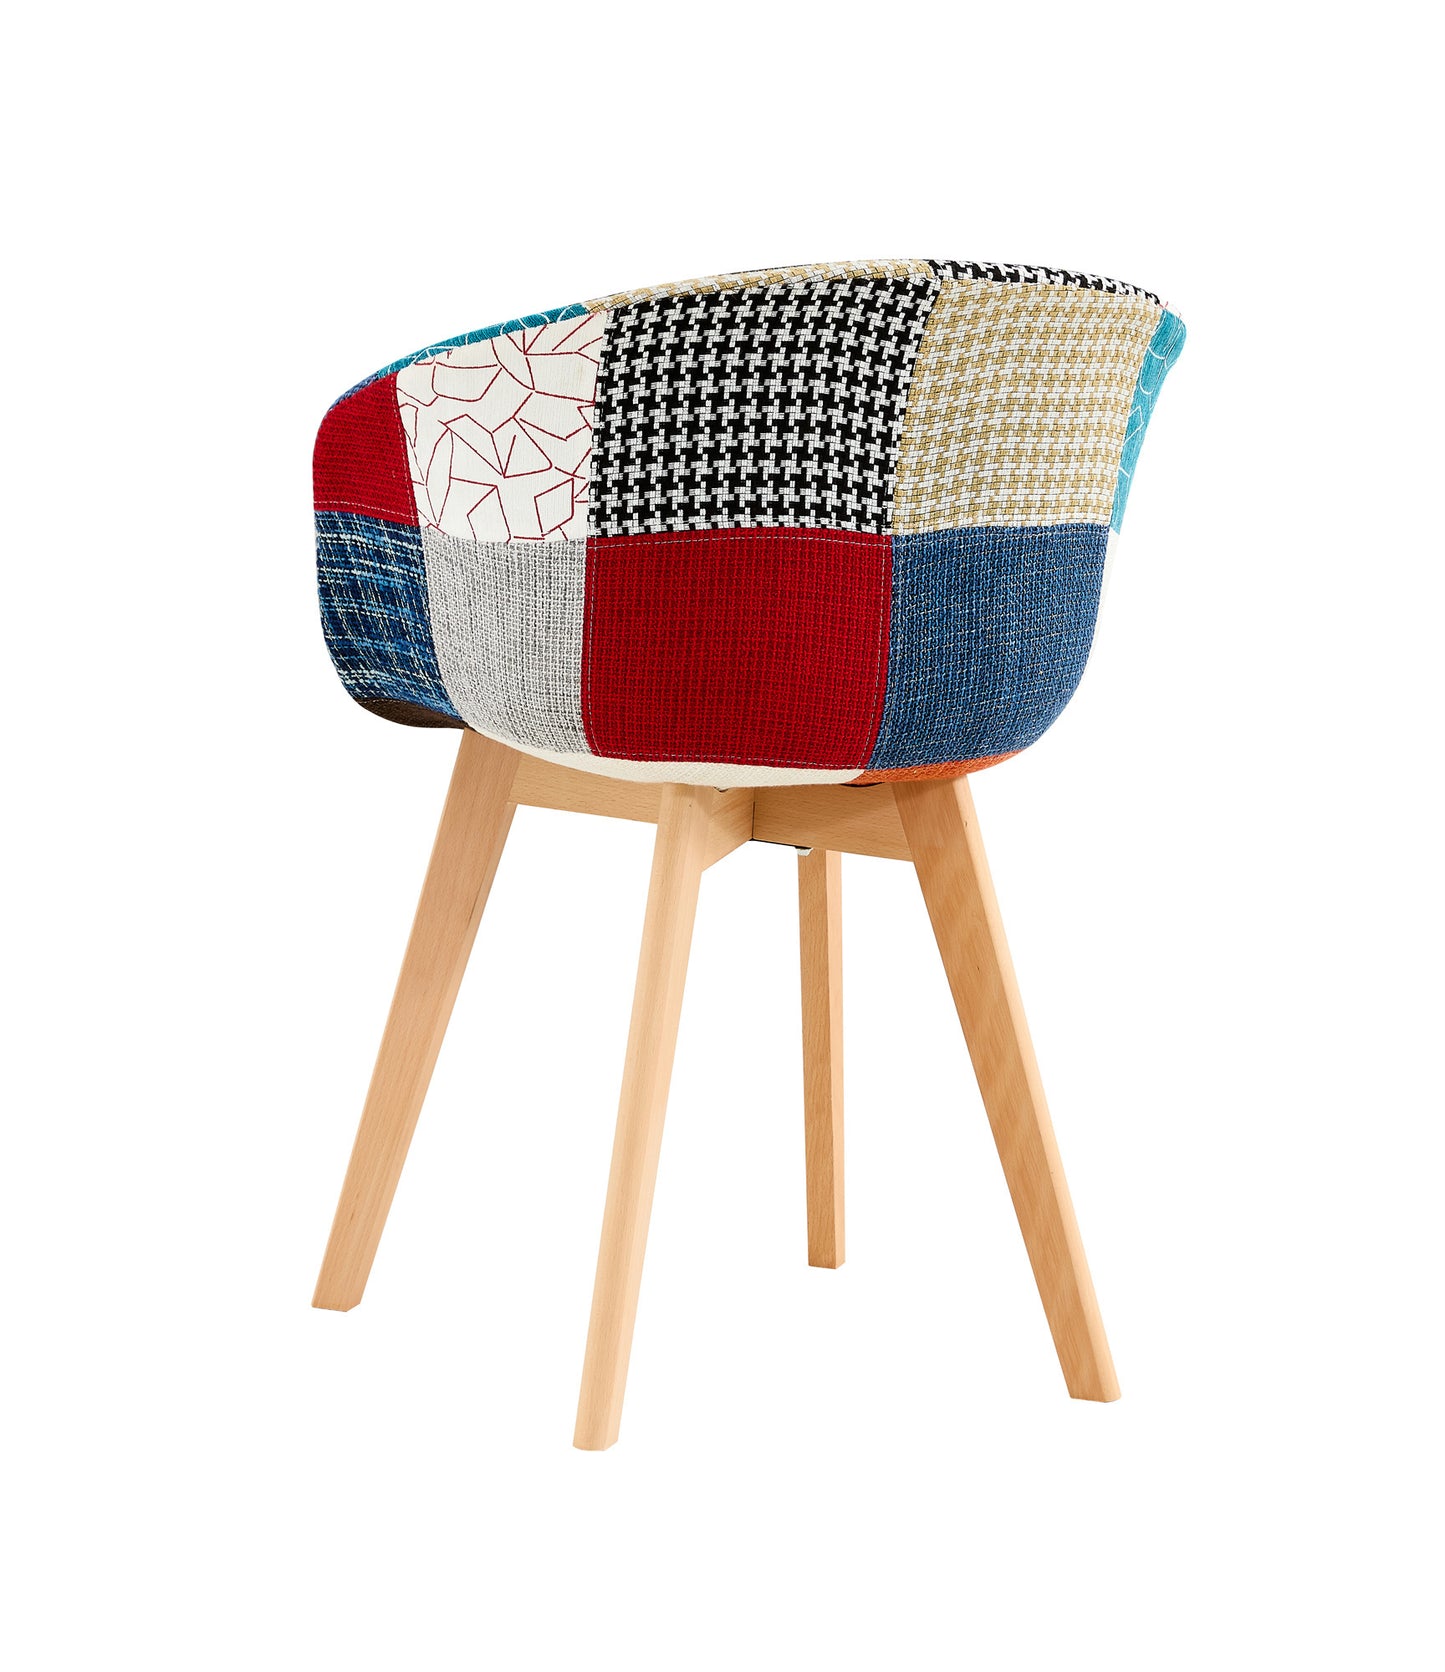 Patchwork Linen Accent Chairs, set of 2